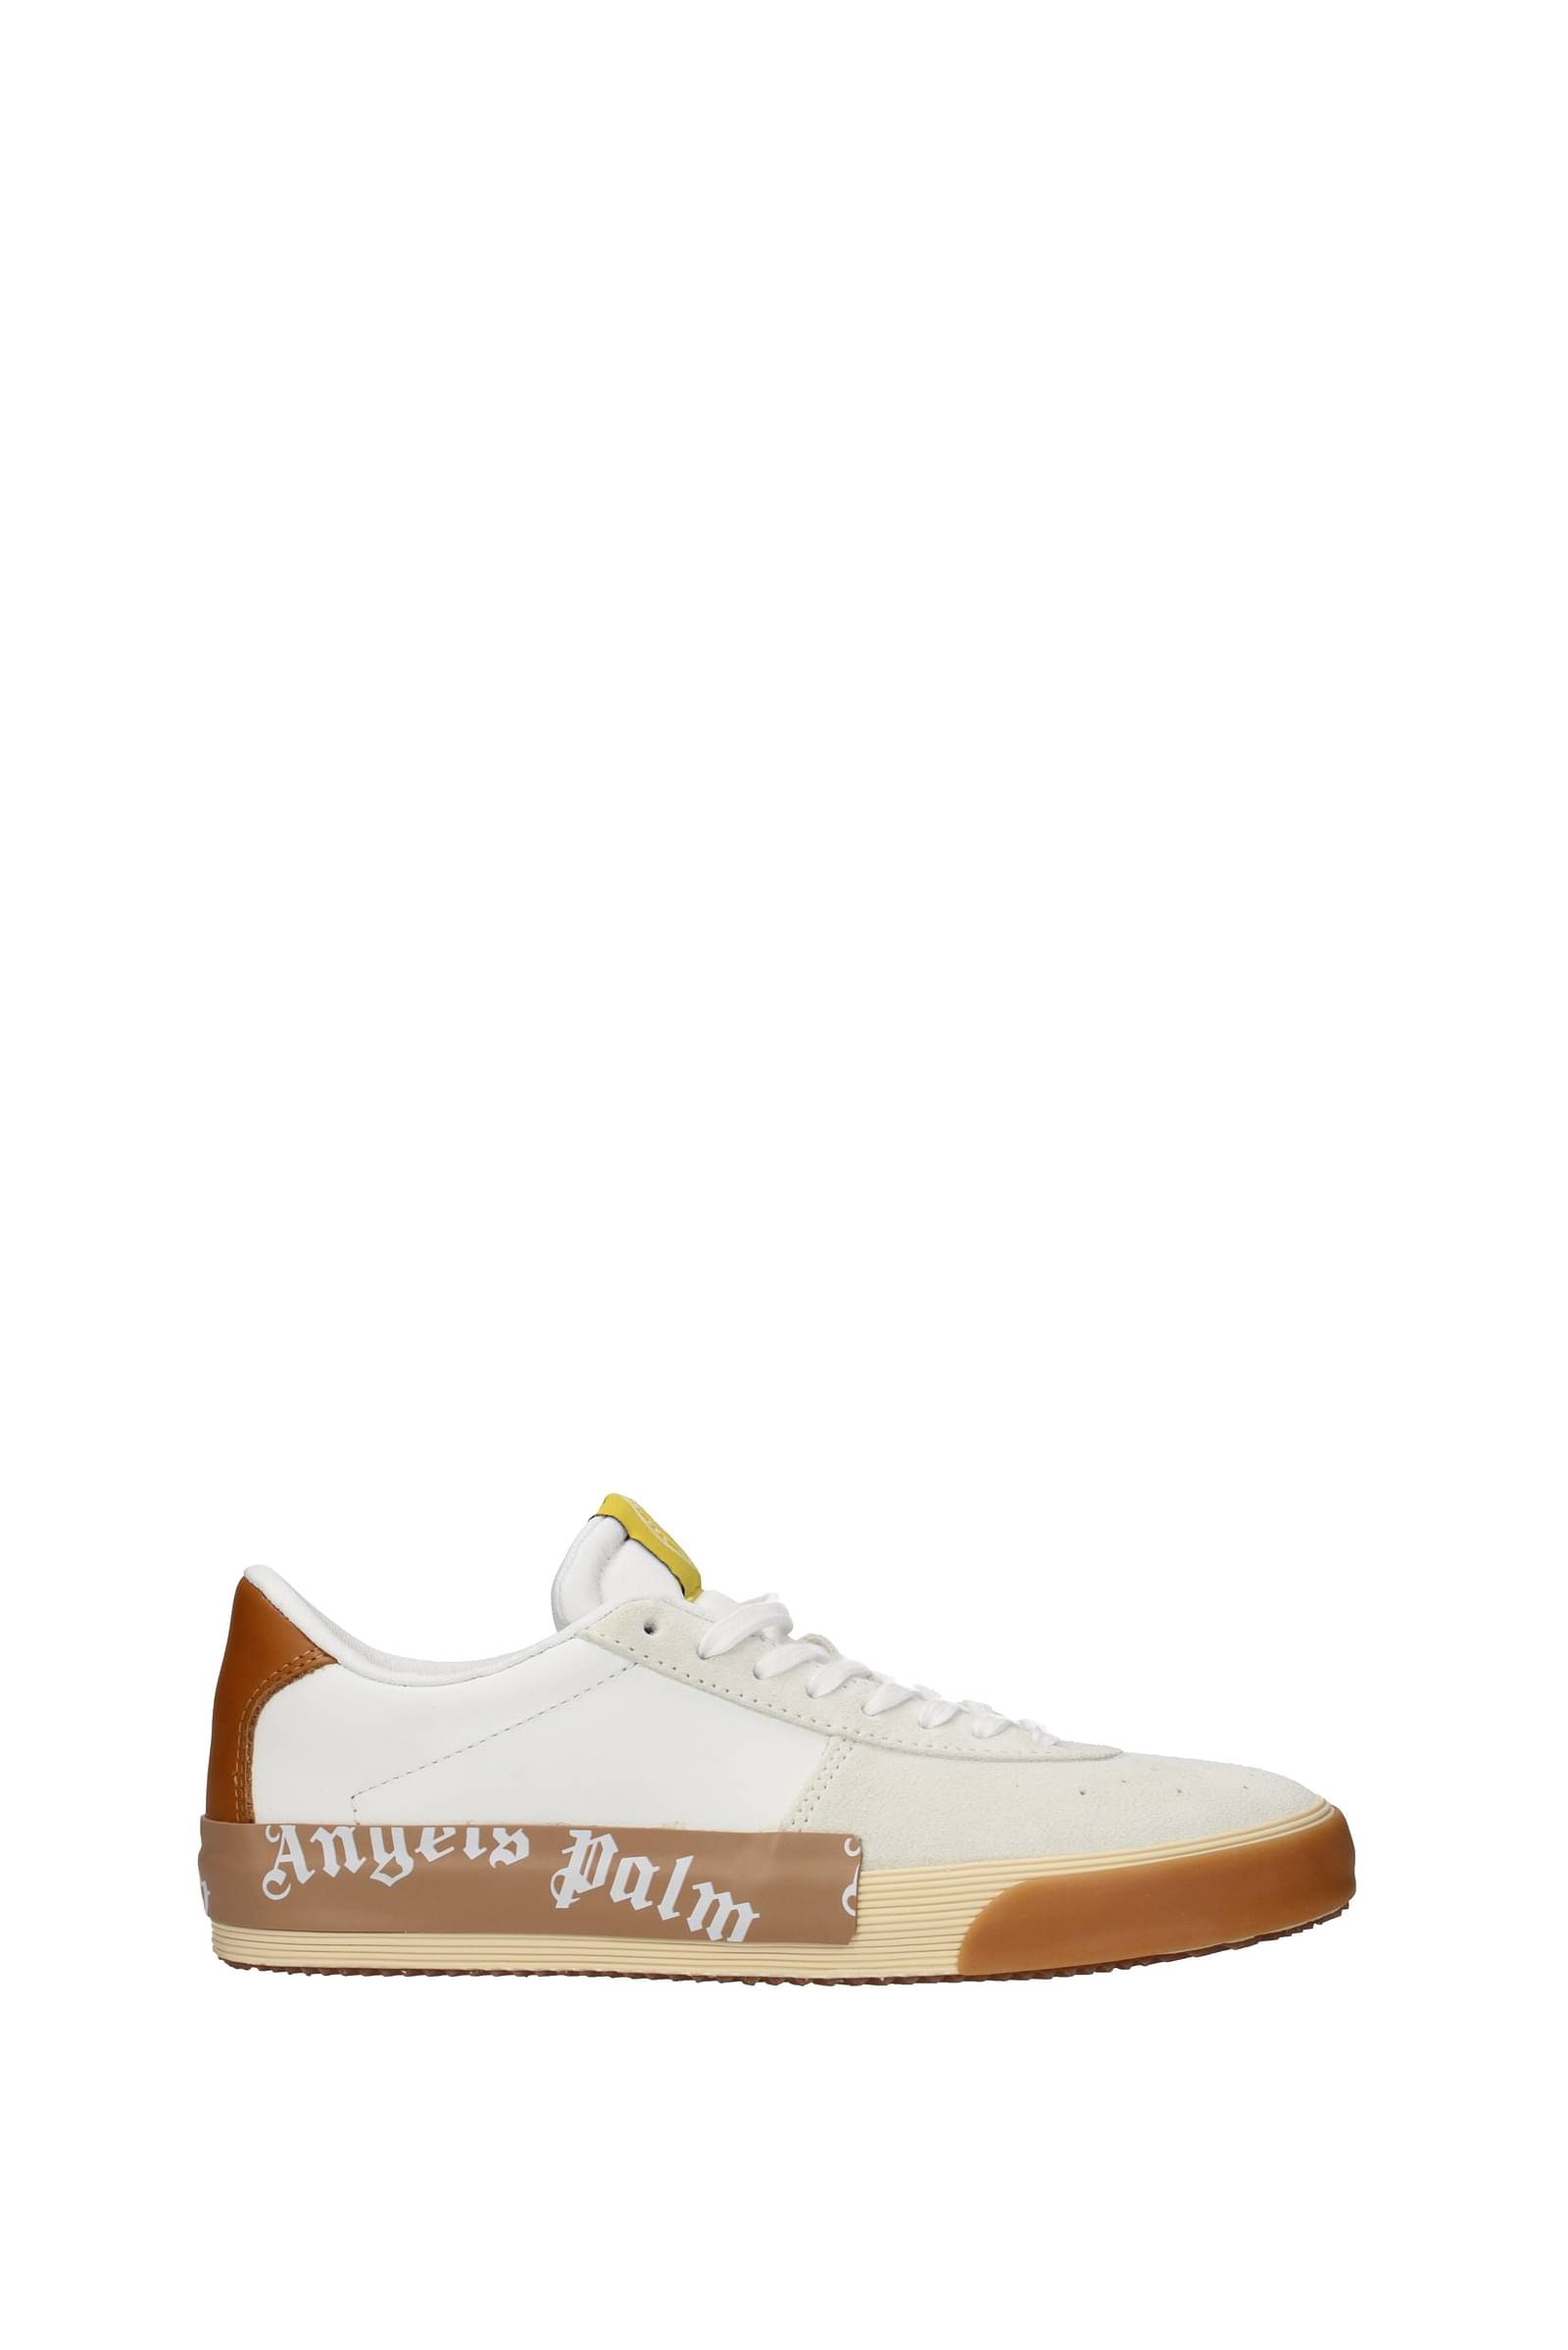 PALM ANGELS SNEAKERS SUEDE